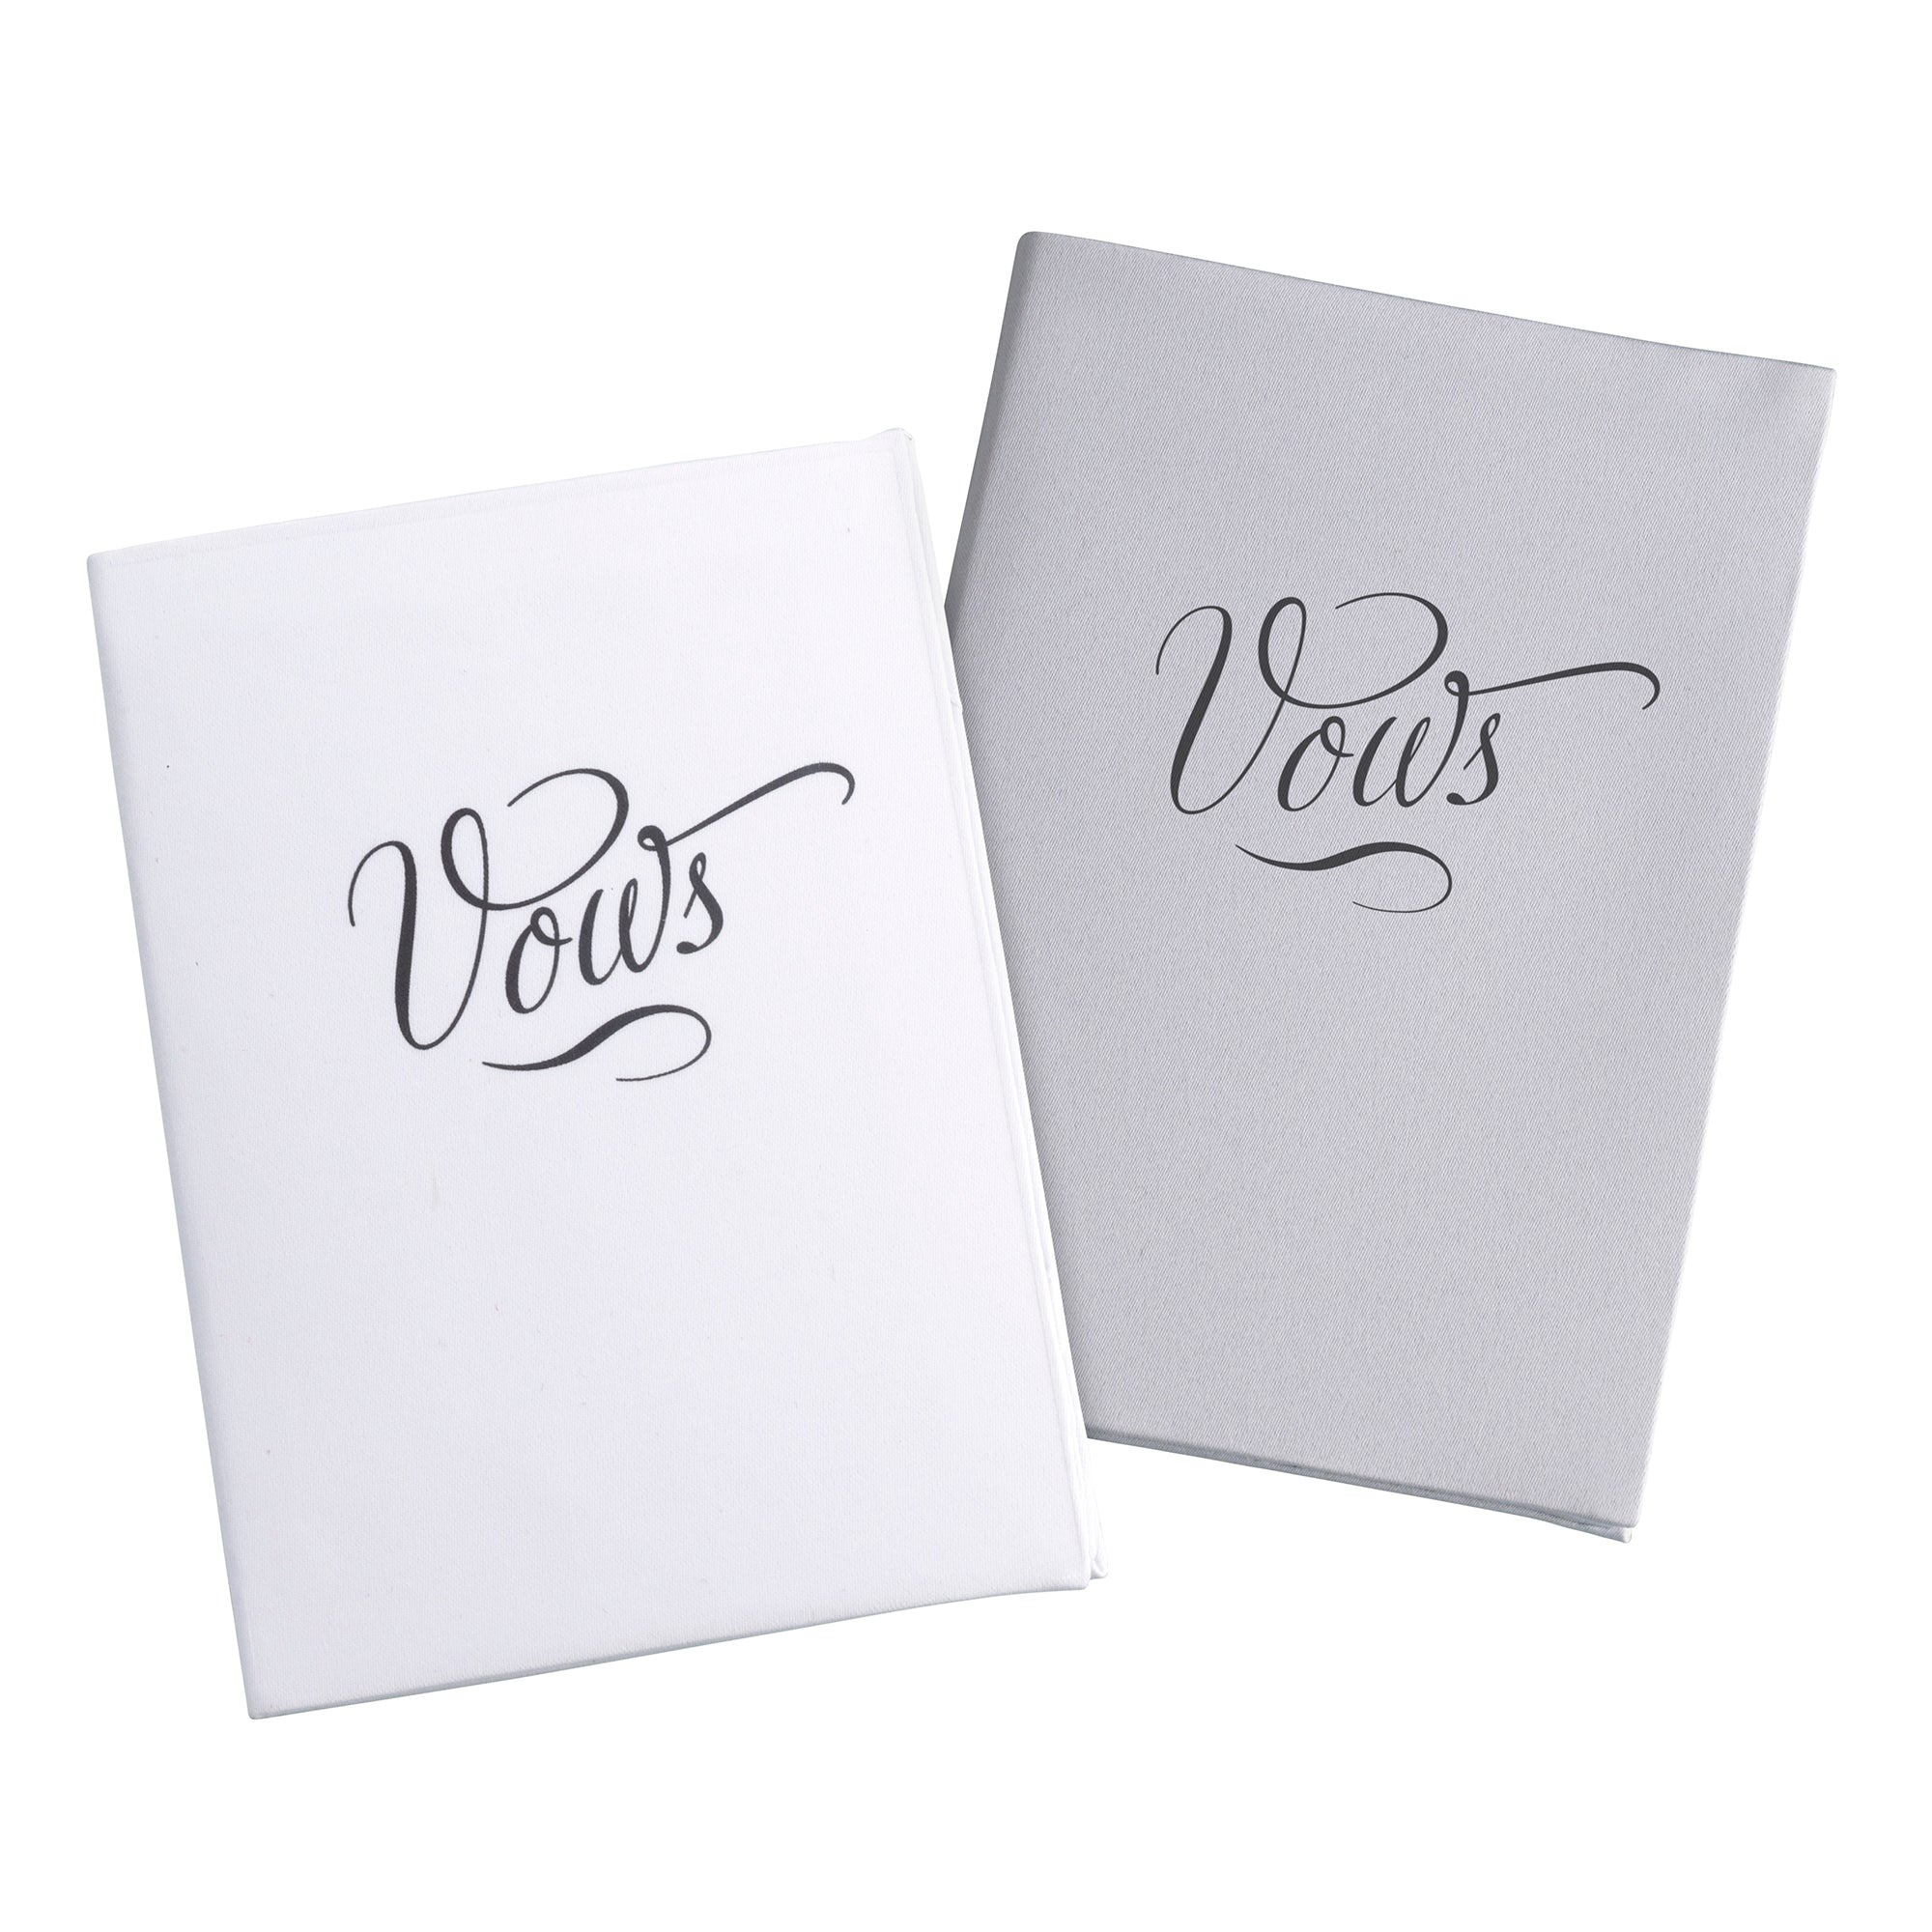 White and Silver Satin Vows Books  Set of 2